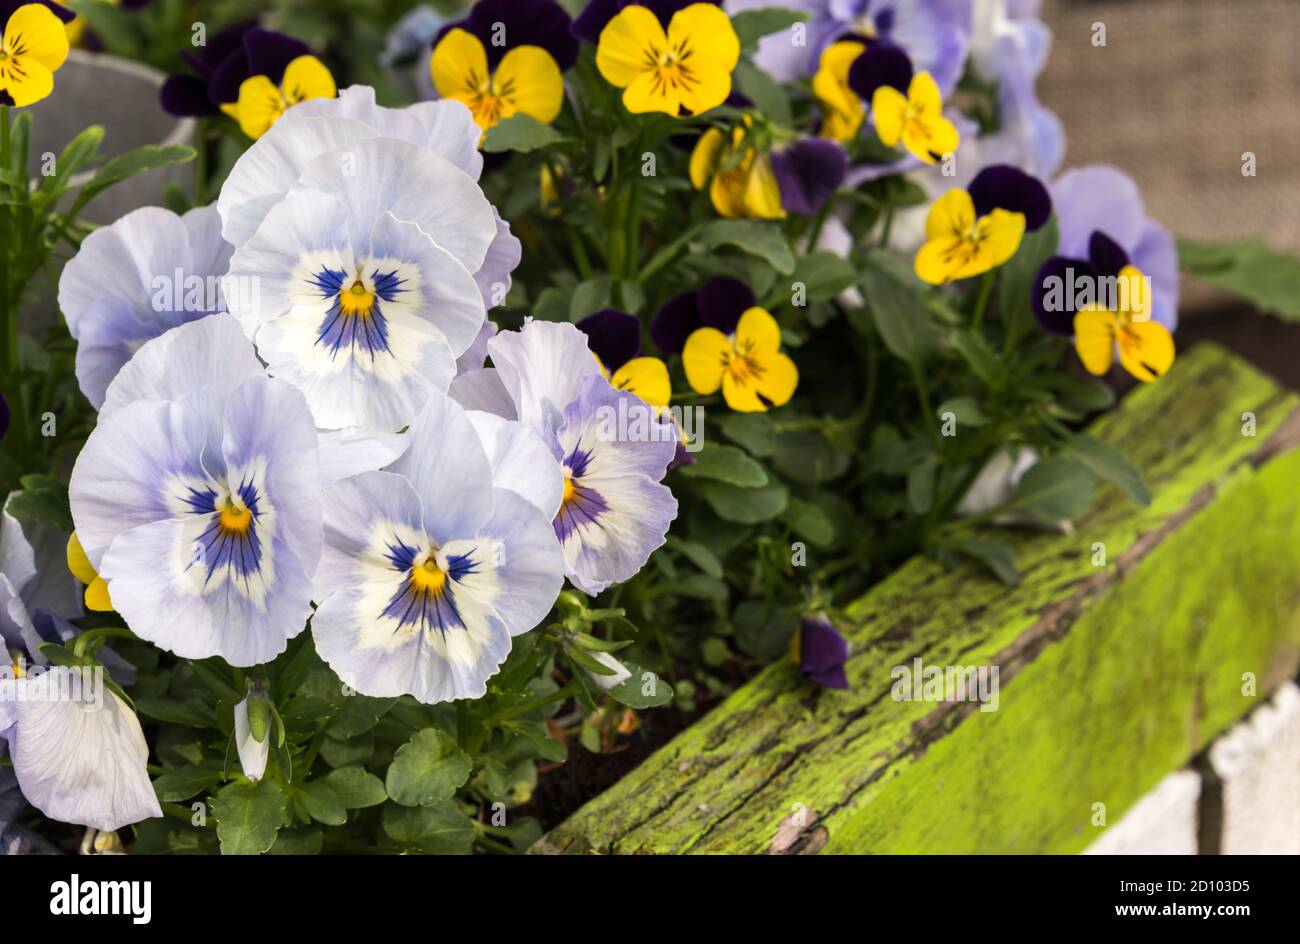 Beautiful purple and yellow pansies in a green wooden planter box Stock Photo